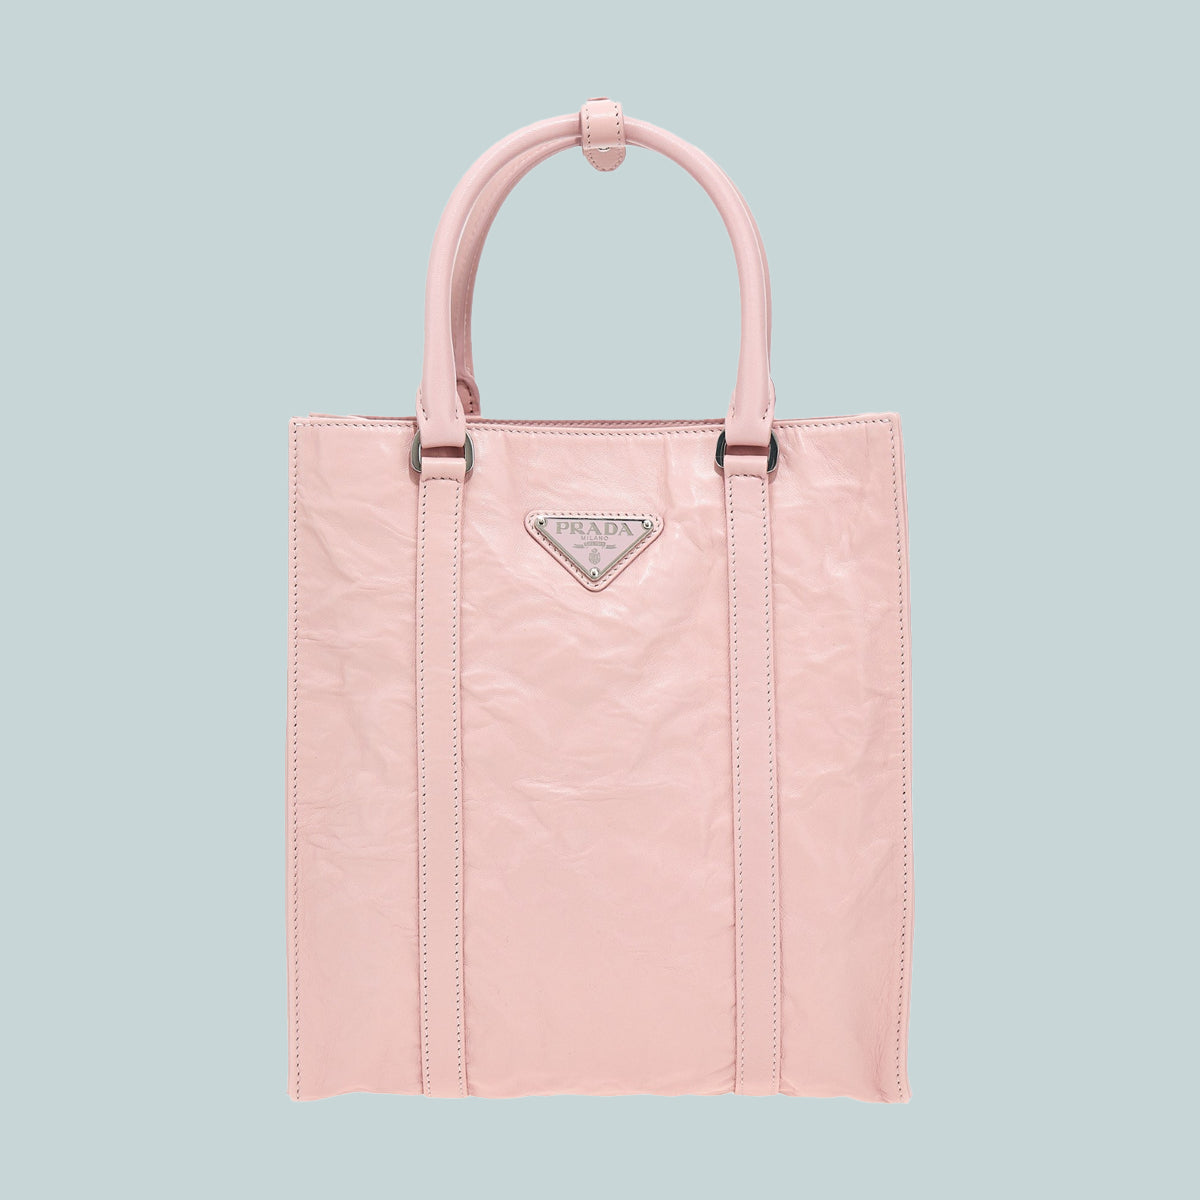 Small antique nappa leather tote pink